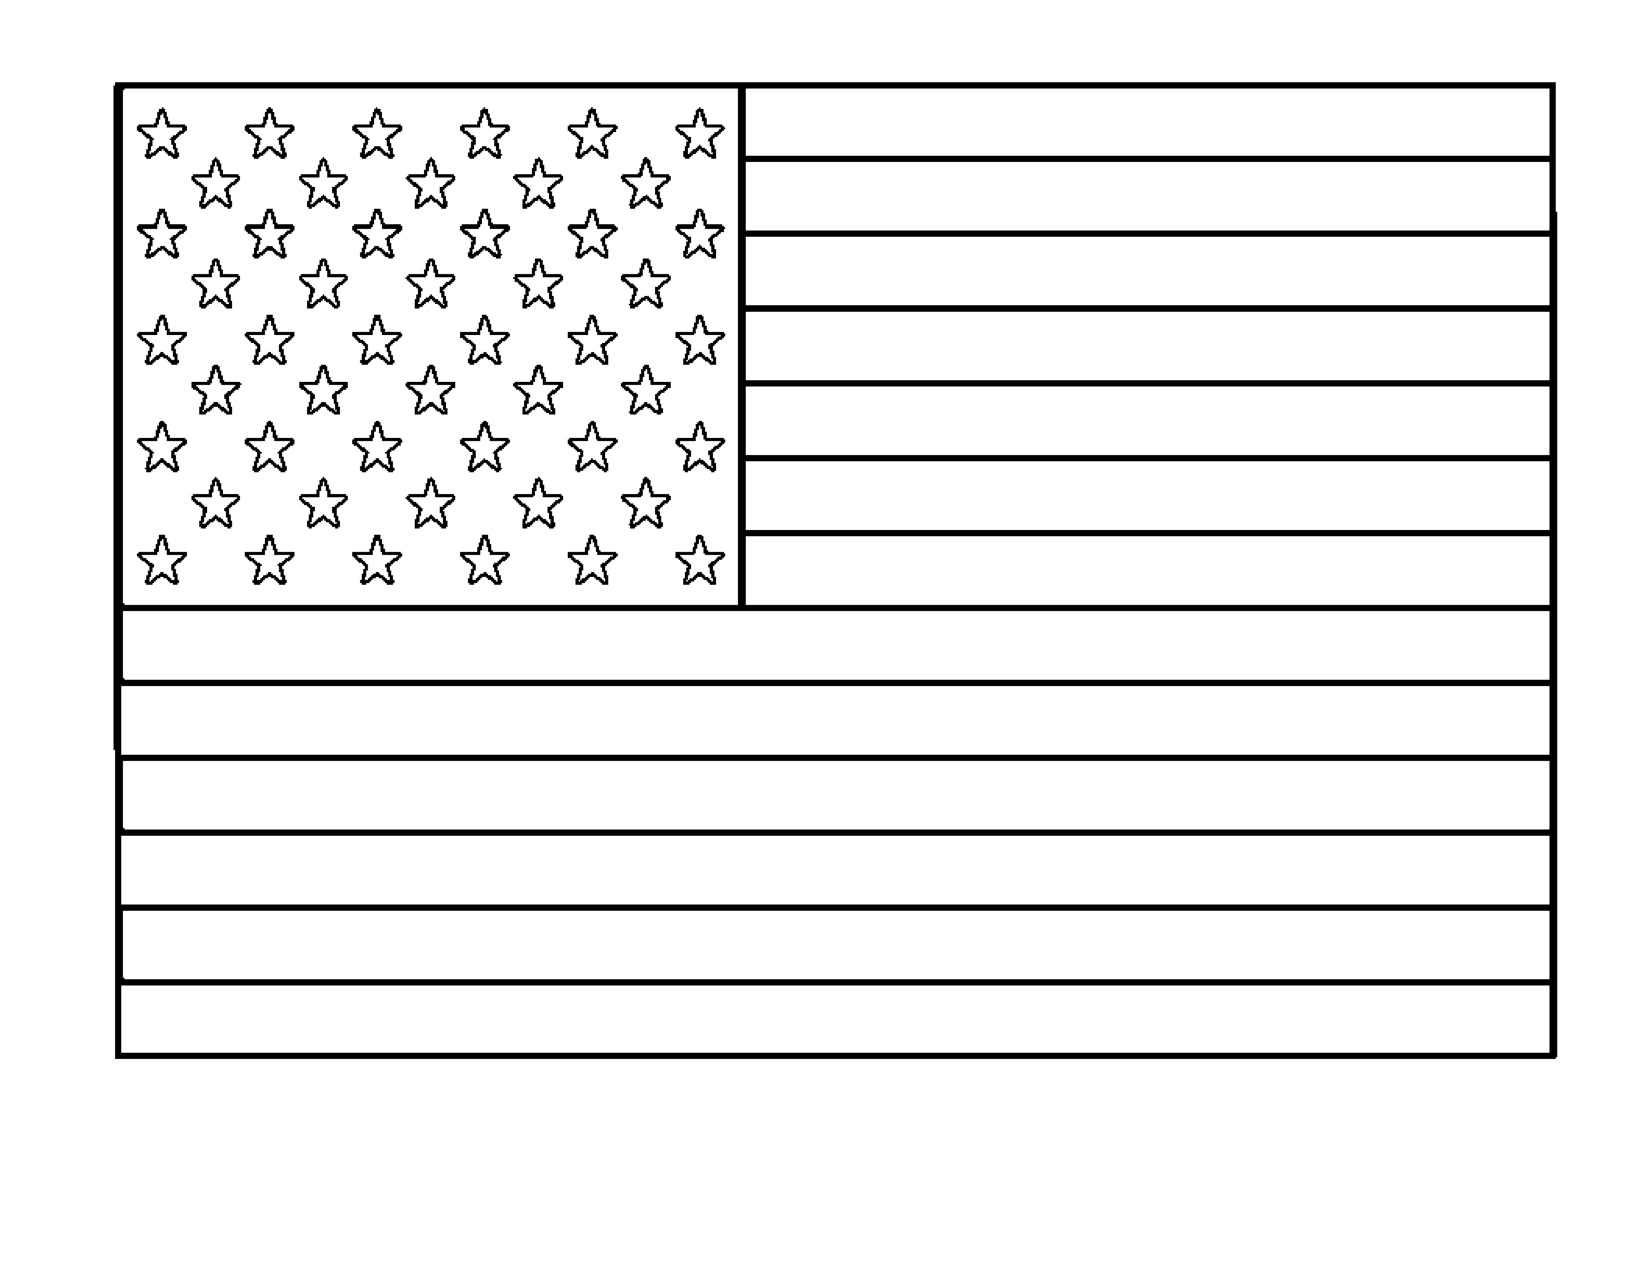 free-us-flag-in-black-and-white-download-free-us-flag-in-black-and